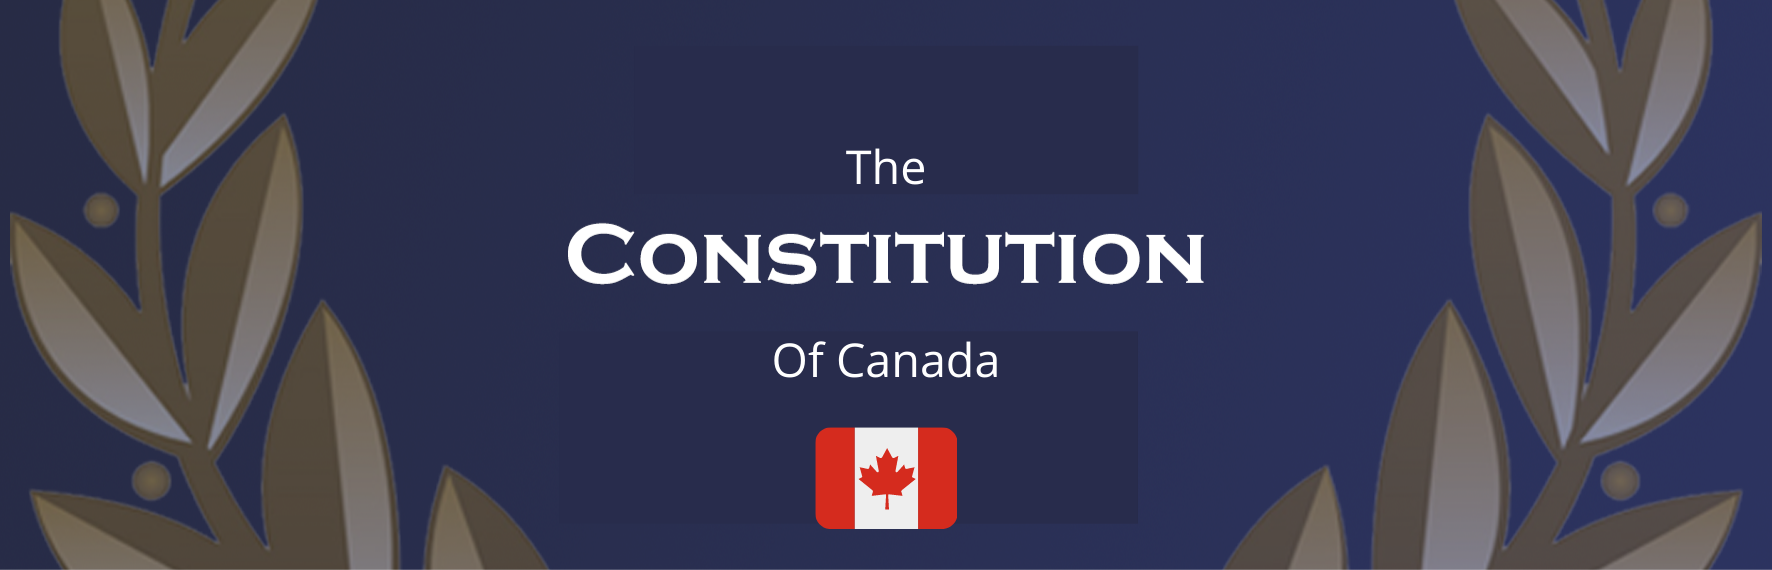 Constitution Header Canada.png